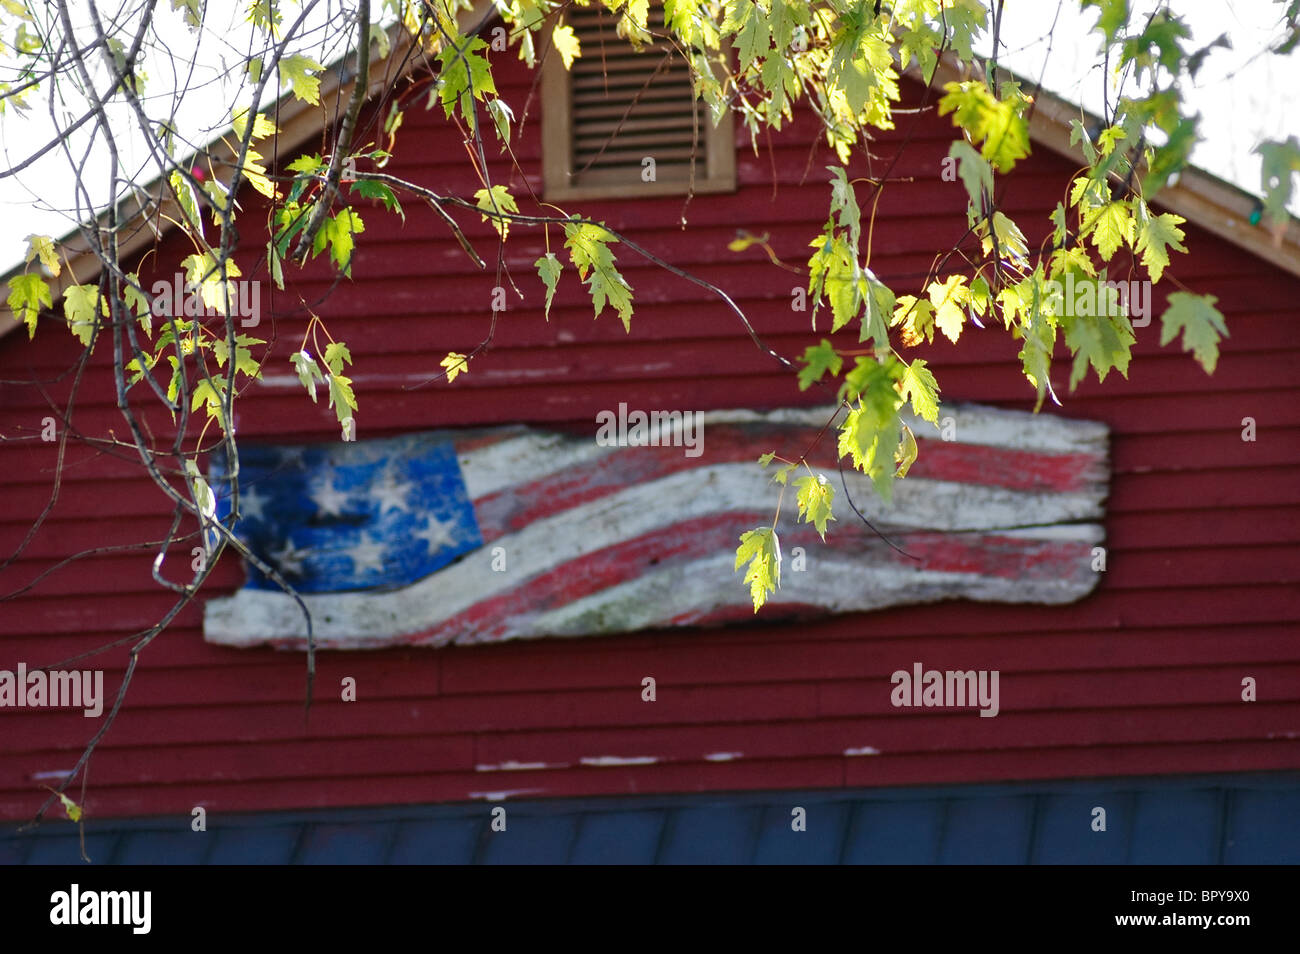 Front of shop in Leiper's Fork, Tennessee Stock Photo